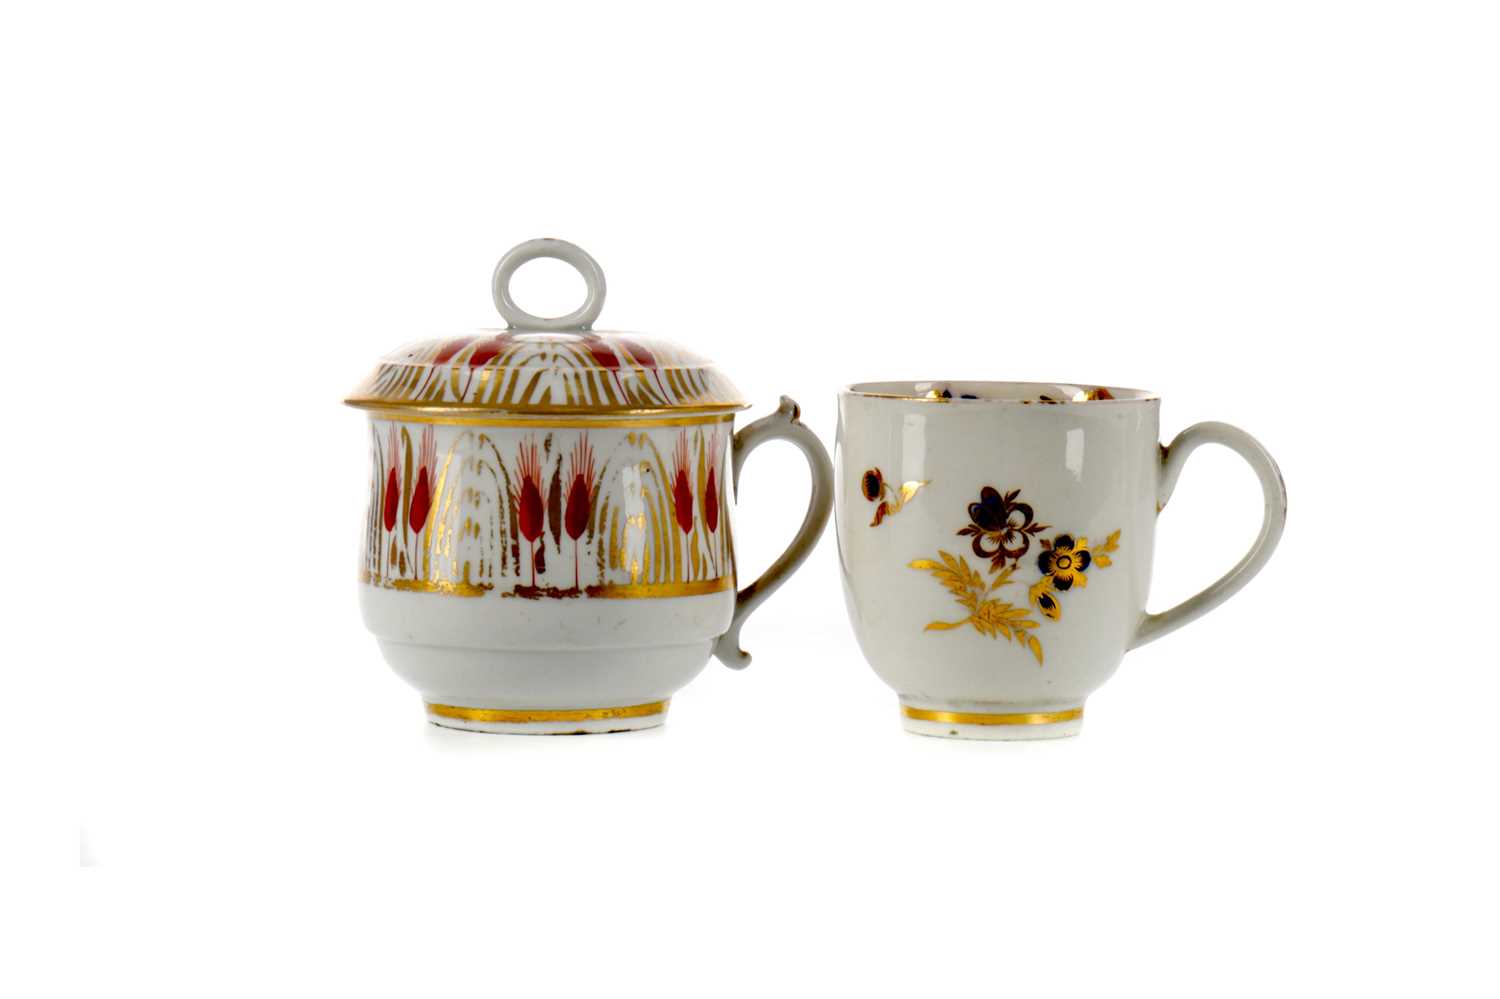 Lot 423 - AN EARLY 19TH CENTURY ENGLISH PORCELAIN CUSTARD CUP AND COVER, ALONG WITH A WORCESTER COFFEE CUP